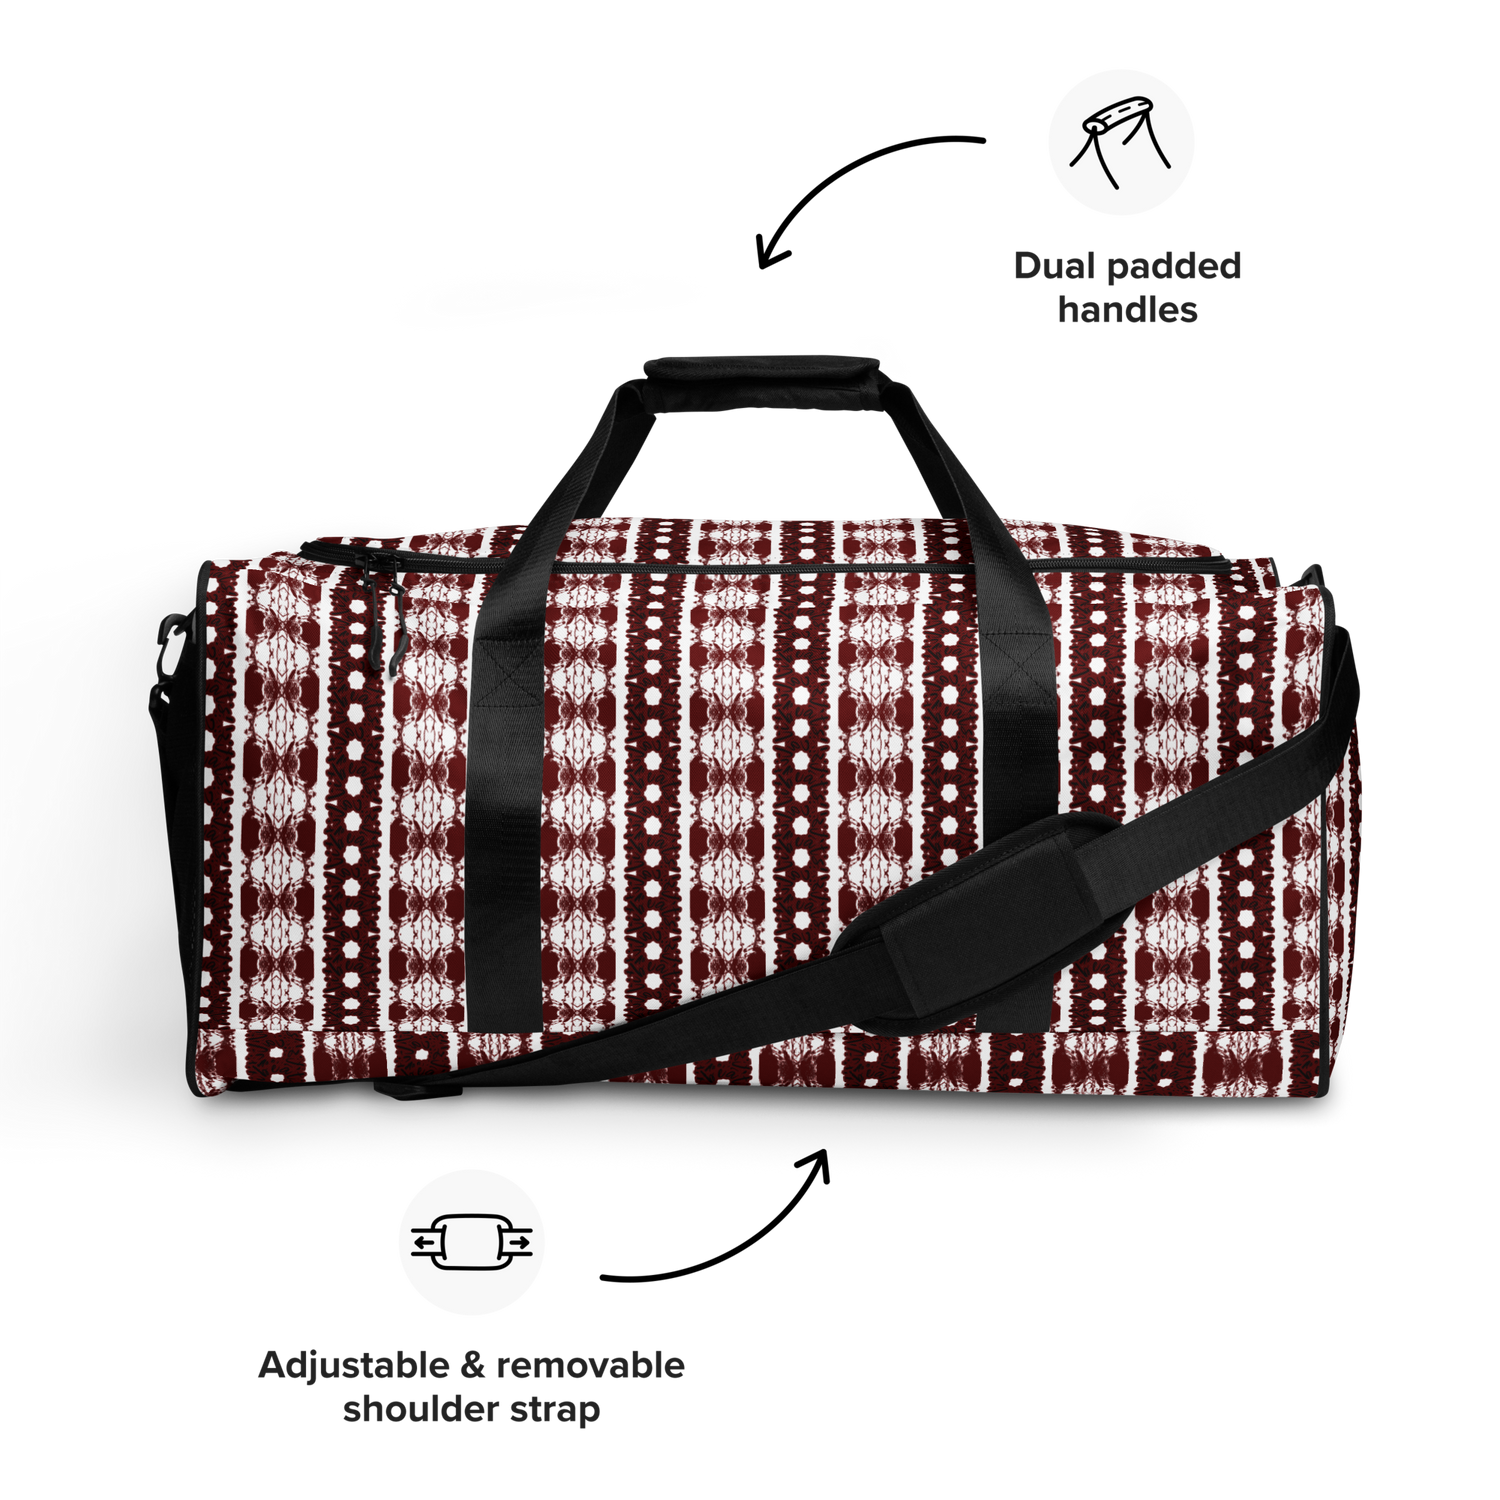 Our duffle bag is built to last. Its robust construction, featuring 100% polyester with black interlining, ensures it can handle the demands of your busiest days. With a generous interior space measuring 22" x 11.5" x 11.5", staying organized has never been easier. Utilize the multiple pockets, including a secure zipper pocket, to keep your essentials within reach.&nbsp; our duffle bag ensures stability with T-piping, providing peace of mind as you navigate daily.